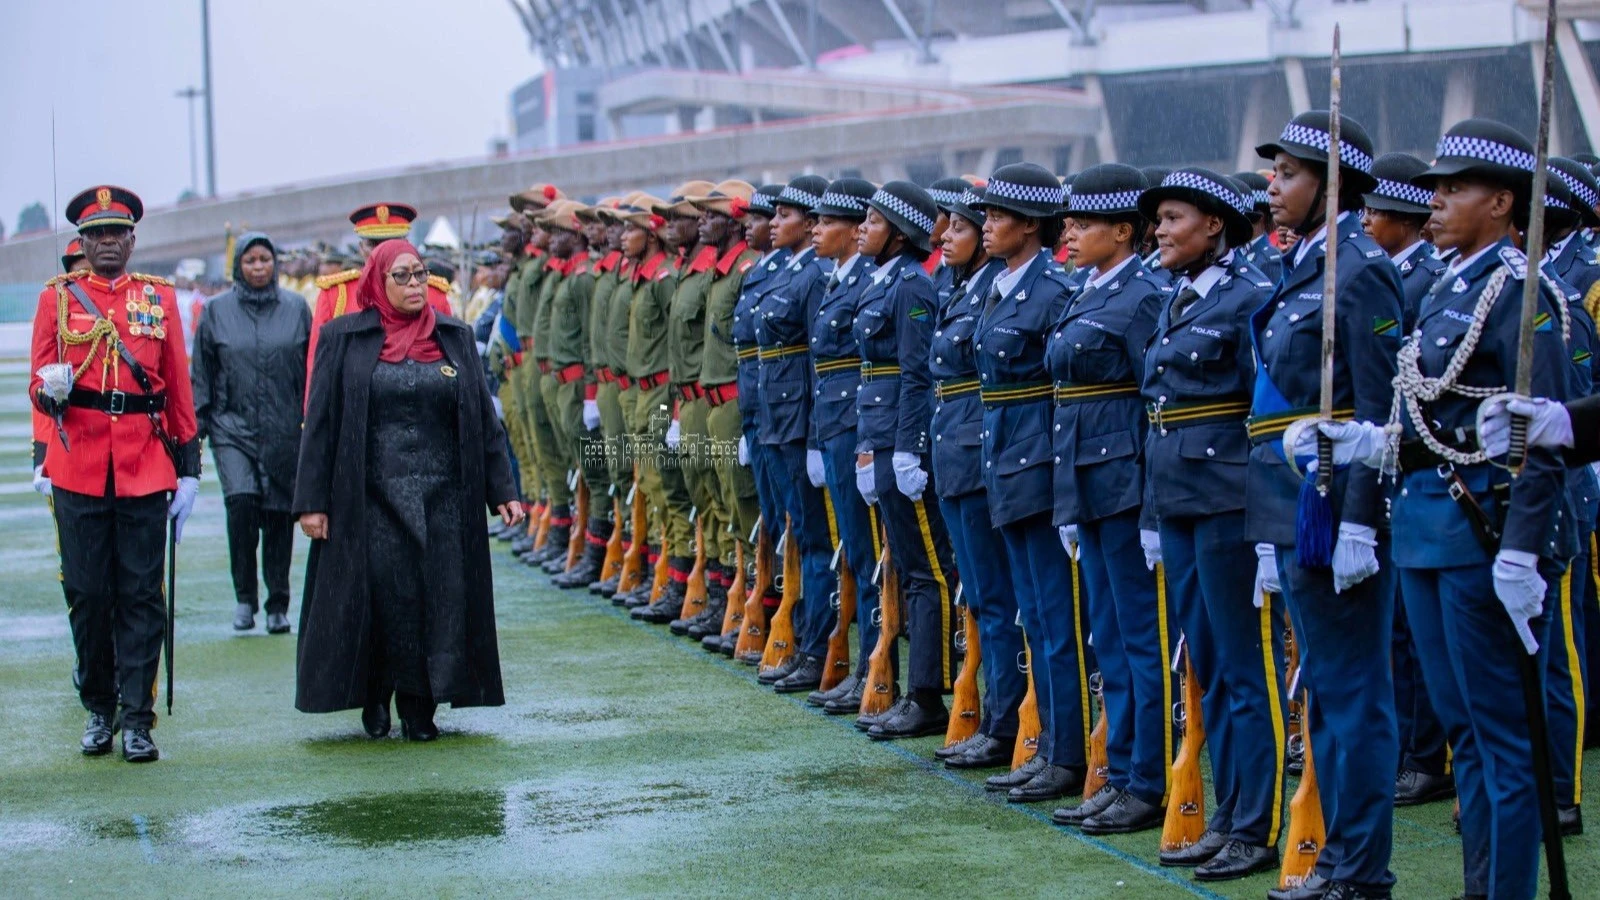 President Samia Suluhu Hassan inspects the guard of honor during the 60-year historic union between Tanganyika and Zanzibar held today at Uhuru Stadium in Dar es Salaam. Photo State House courtesy.